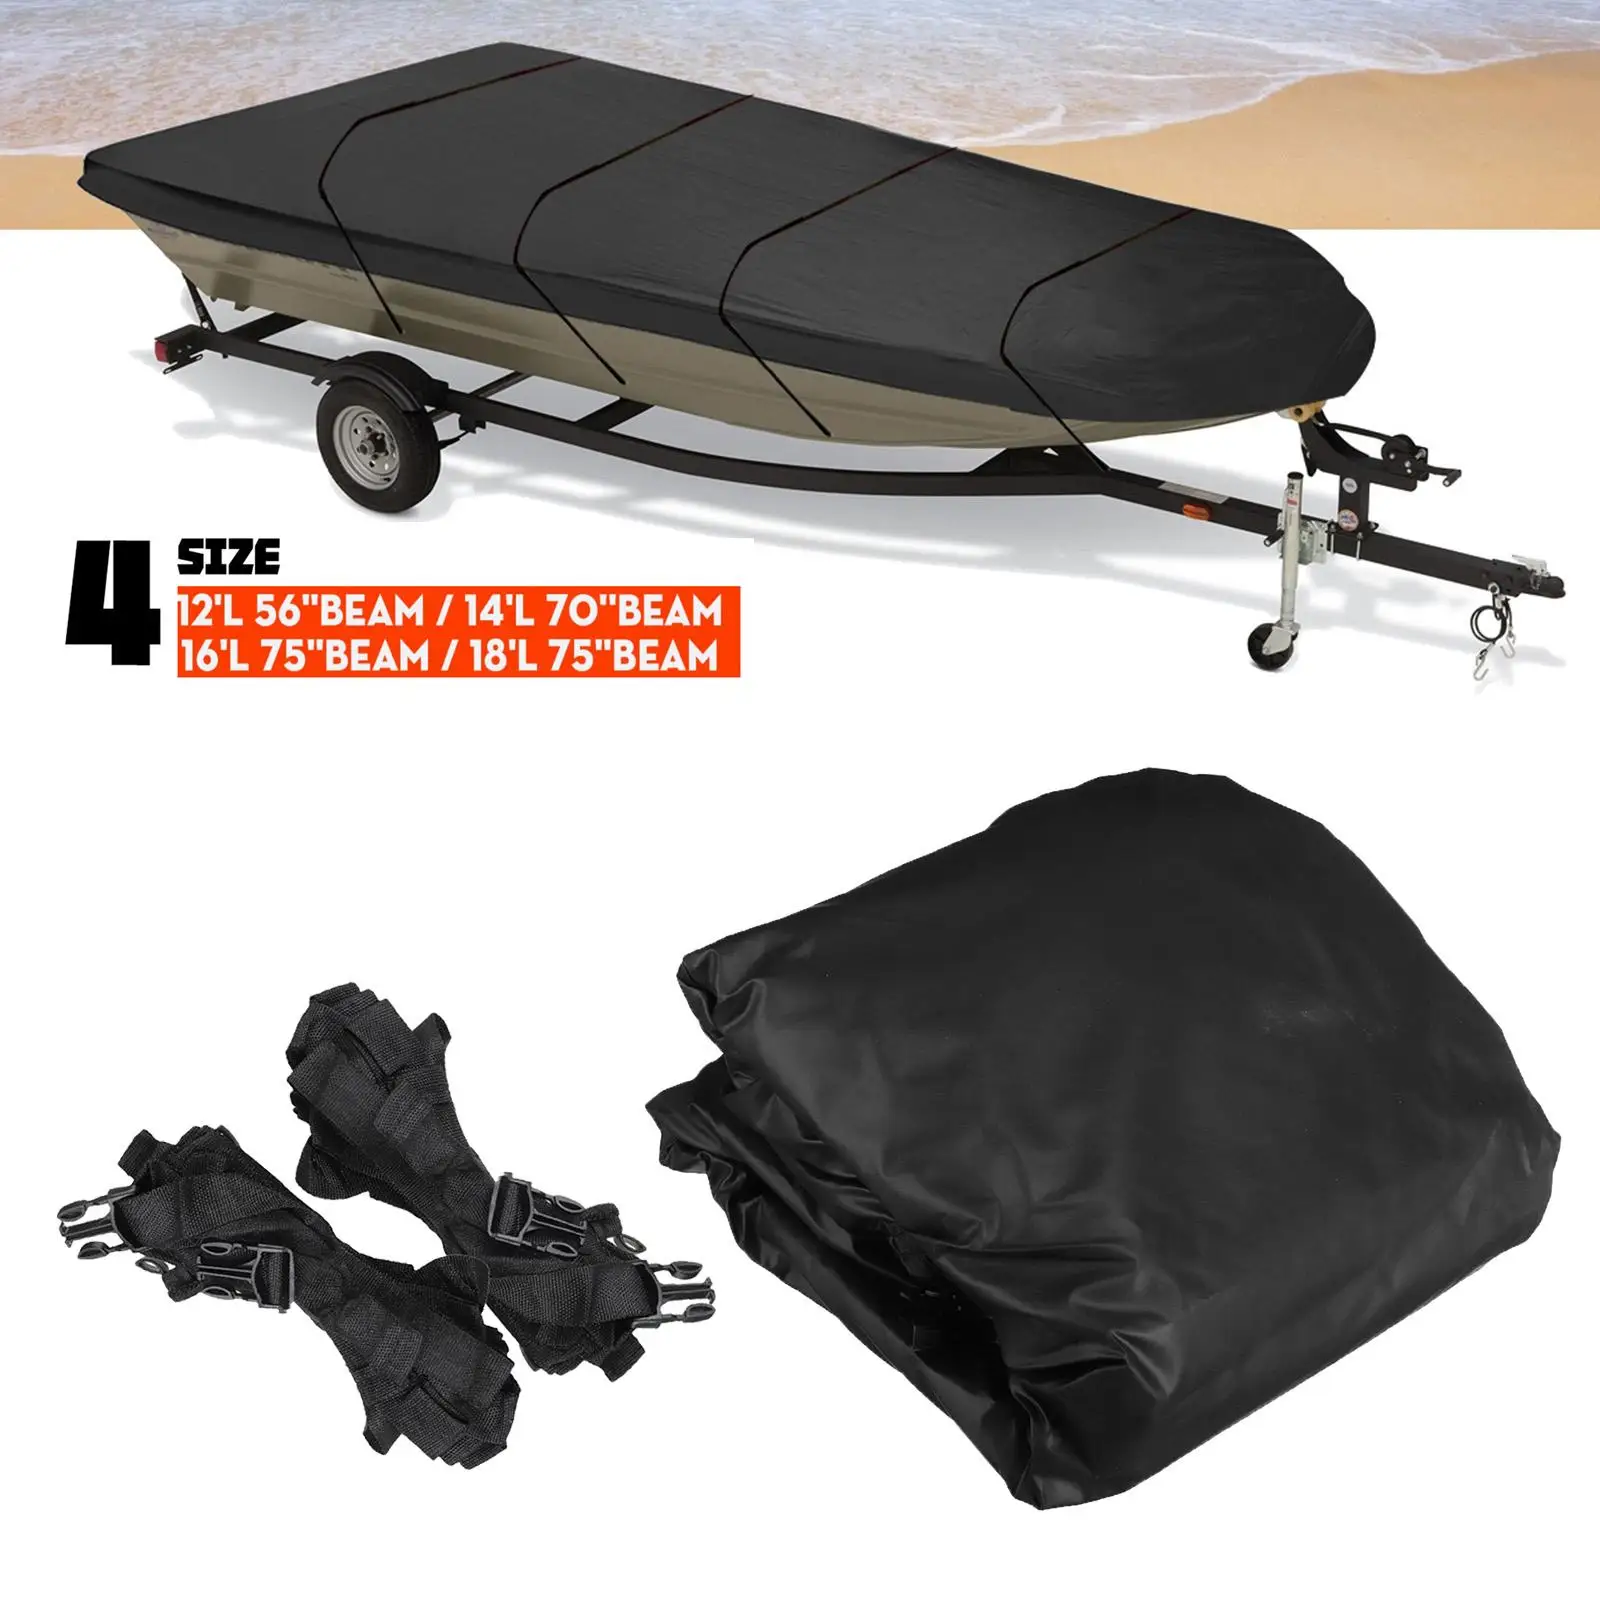 Jon Boat Cover Long-Term Sunshade Durable Dirt Proof Accessories Black Waterproof Replacement for Trailerable Boat Harbor